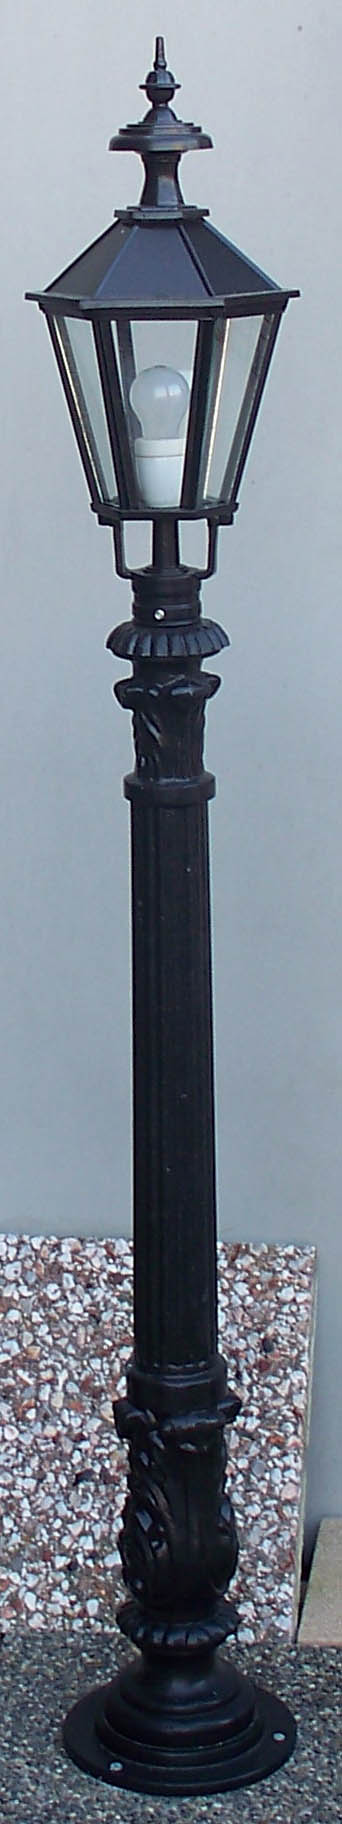 No 7 pole with small 6 sided head